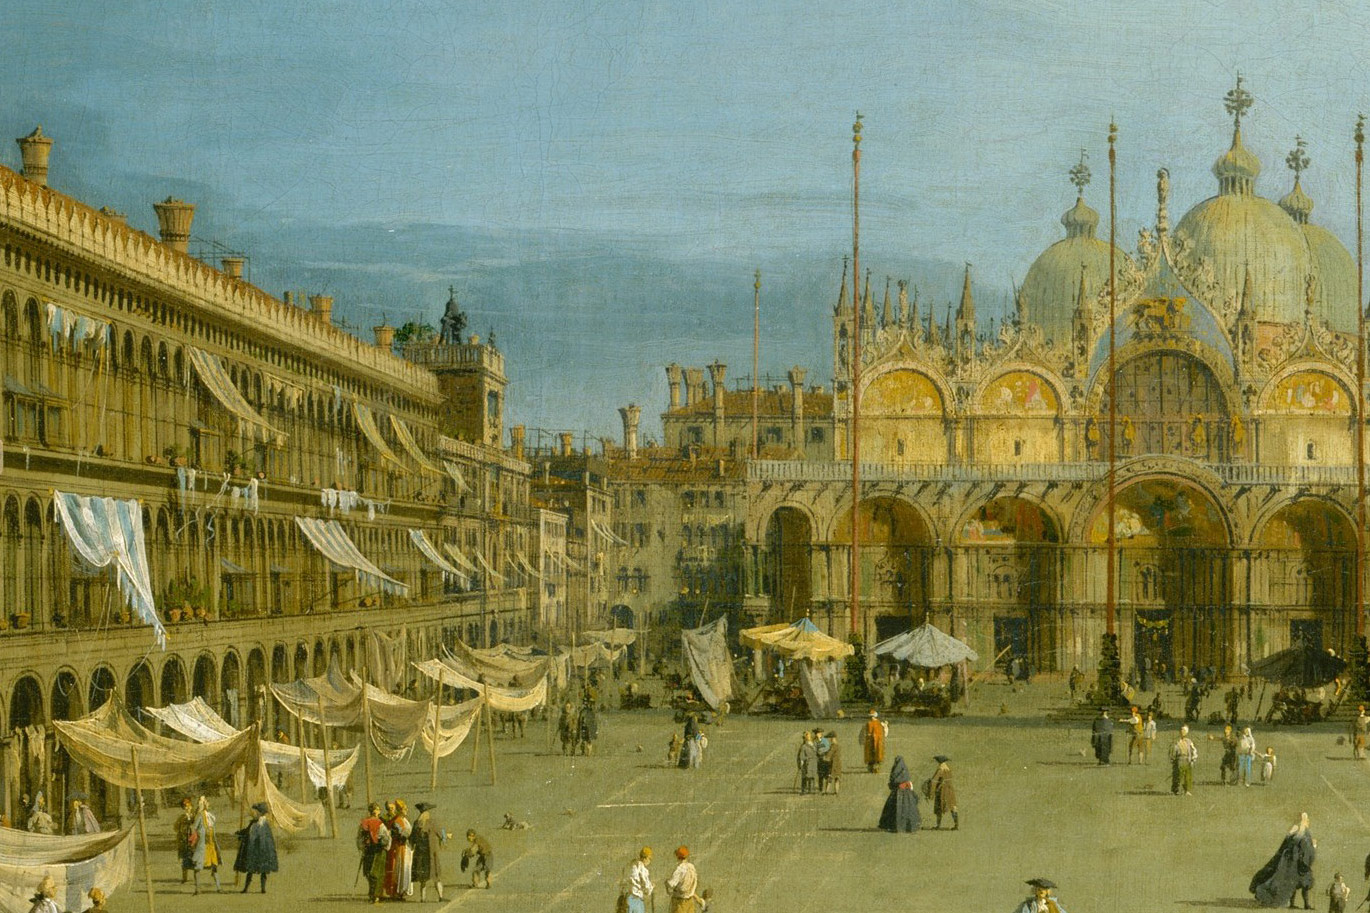 Piazza San Marco by Canaletto